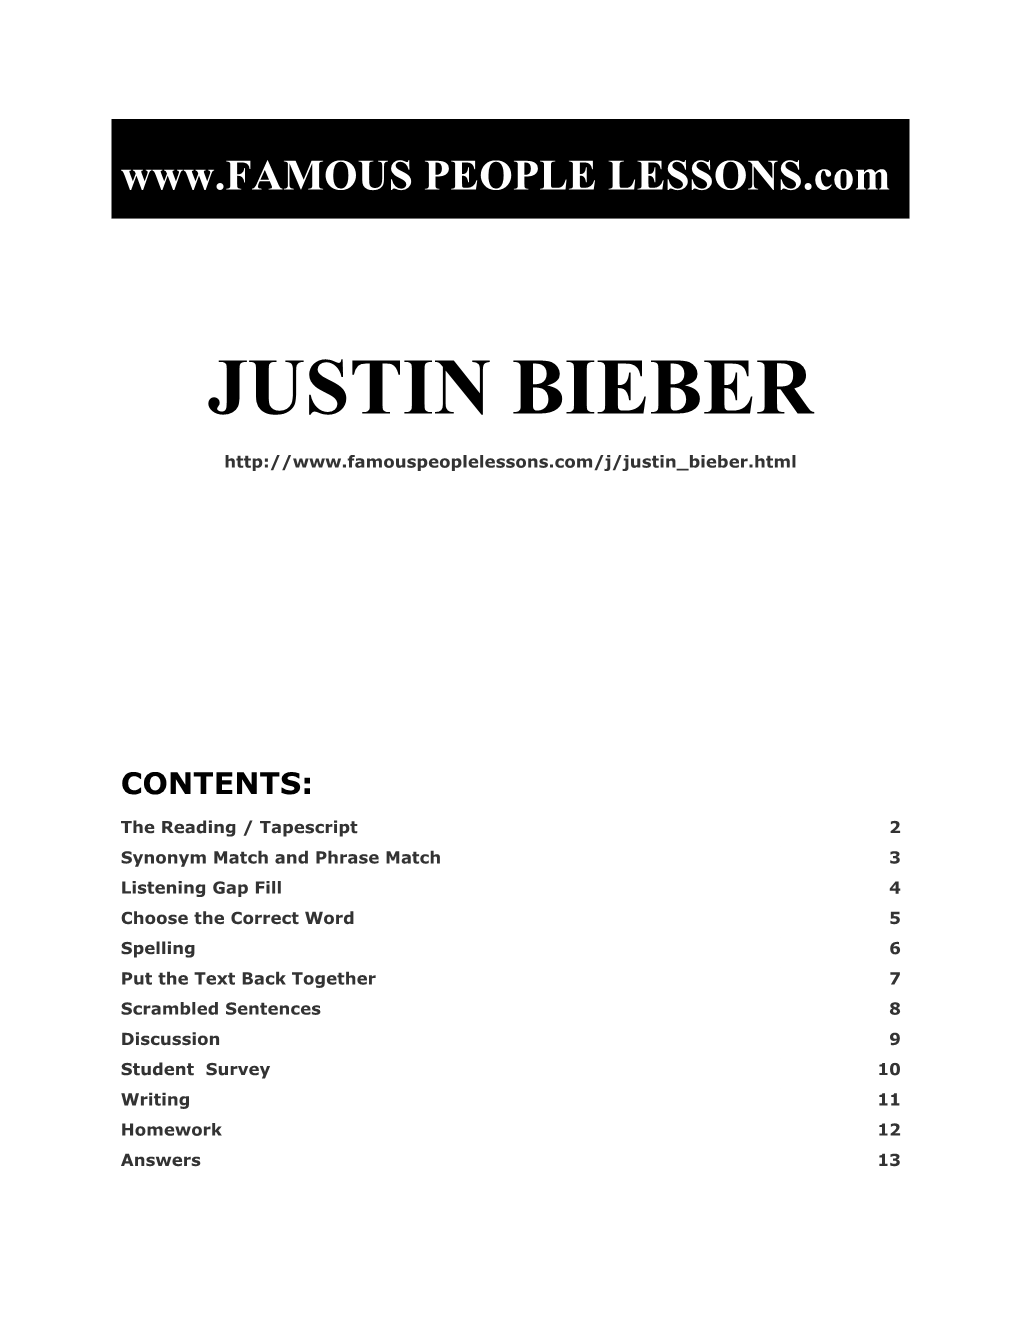 Famous People Lessons - Justin Bieber